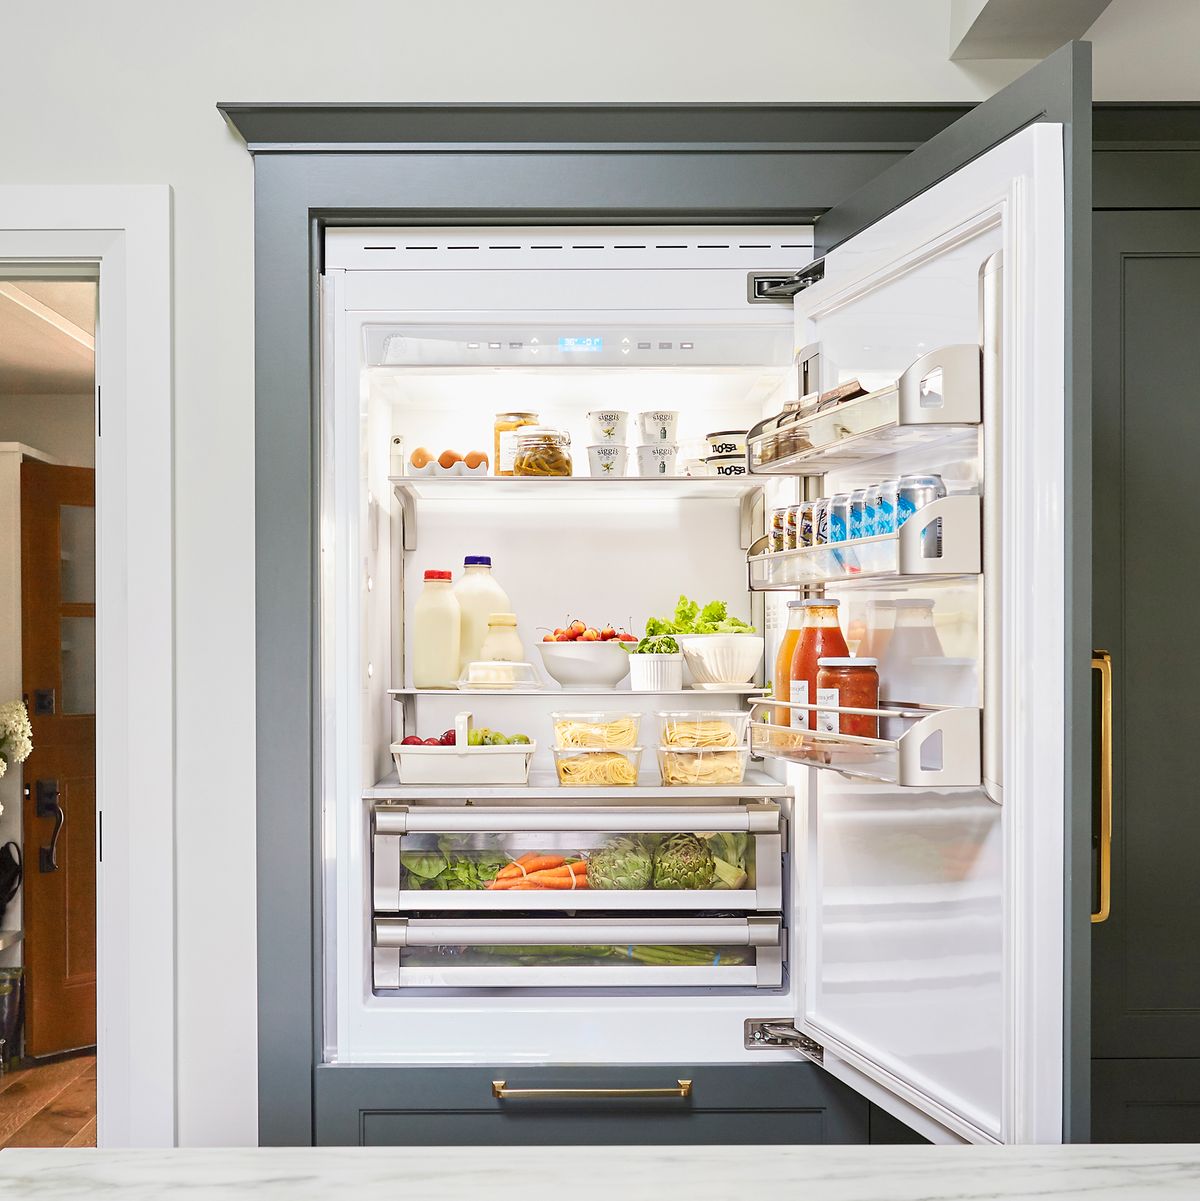 https://hips.hearstapps.com/hmg-prod/images/how-to-organize-a-fridge-designed-by-emily-henderson-design-photo-by-sara-tramp-38-1611349492.jpg?crop=0.998xw:0.800xh;0,0.121xh&resize=1200:*